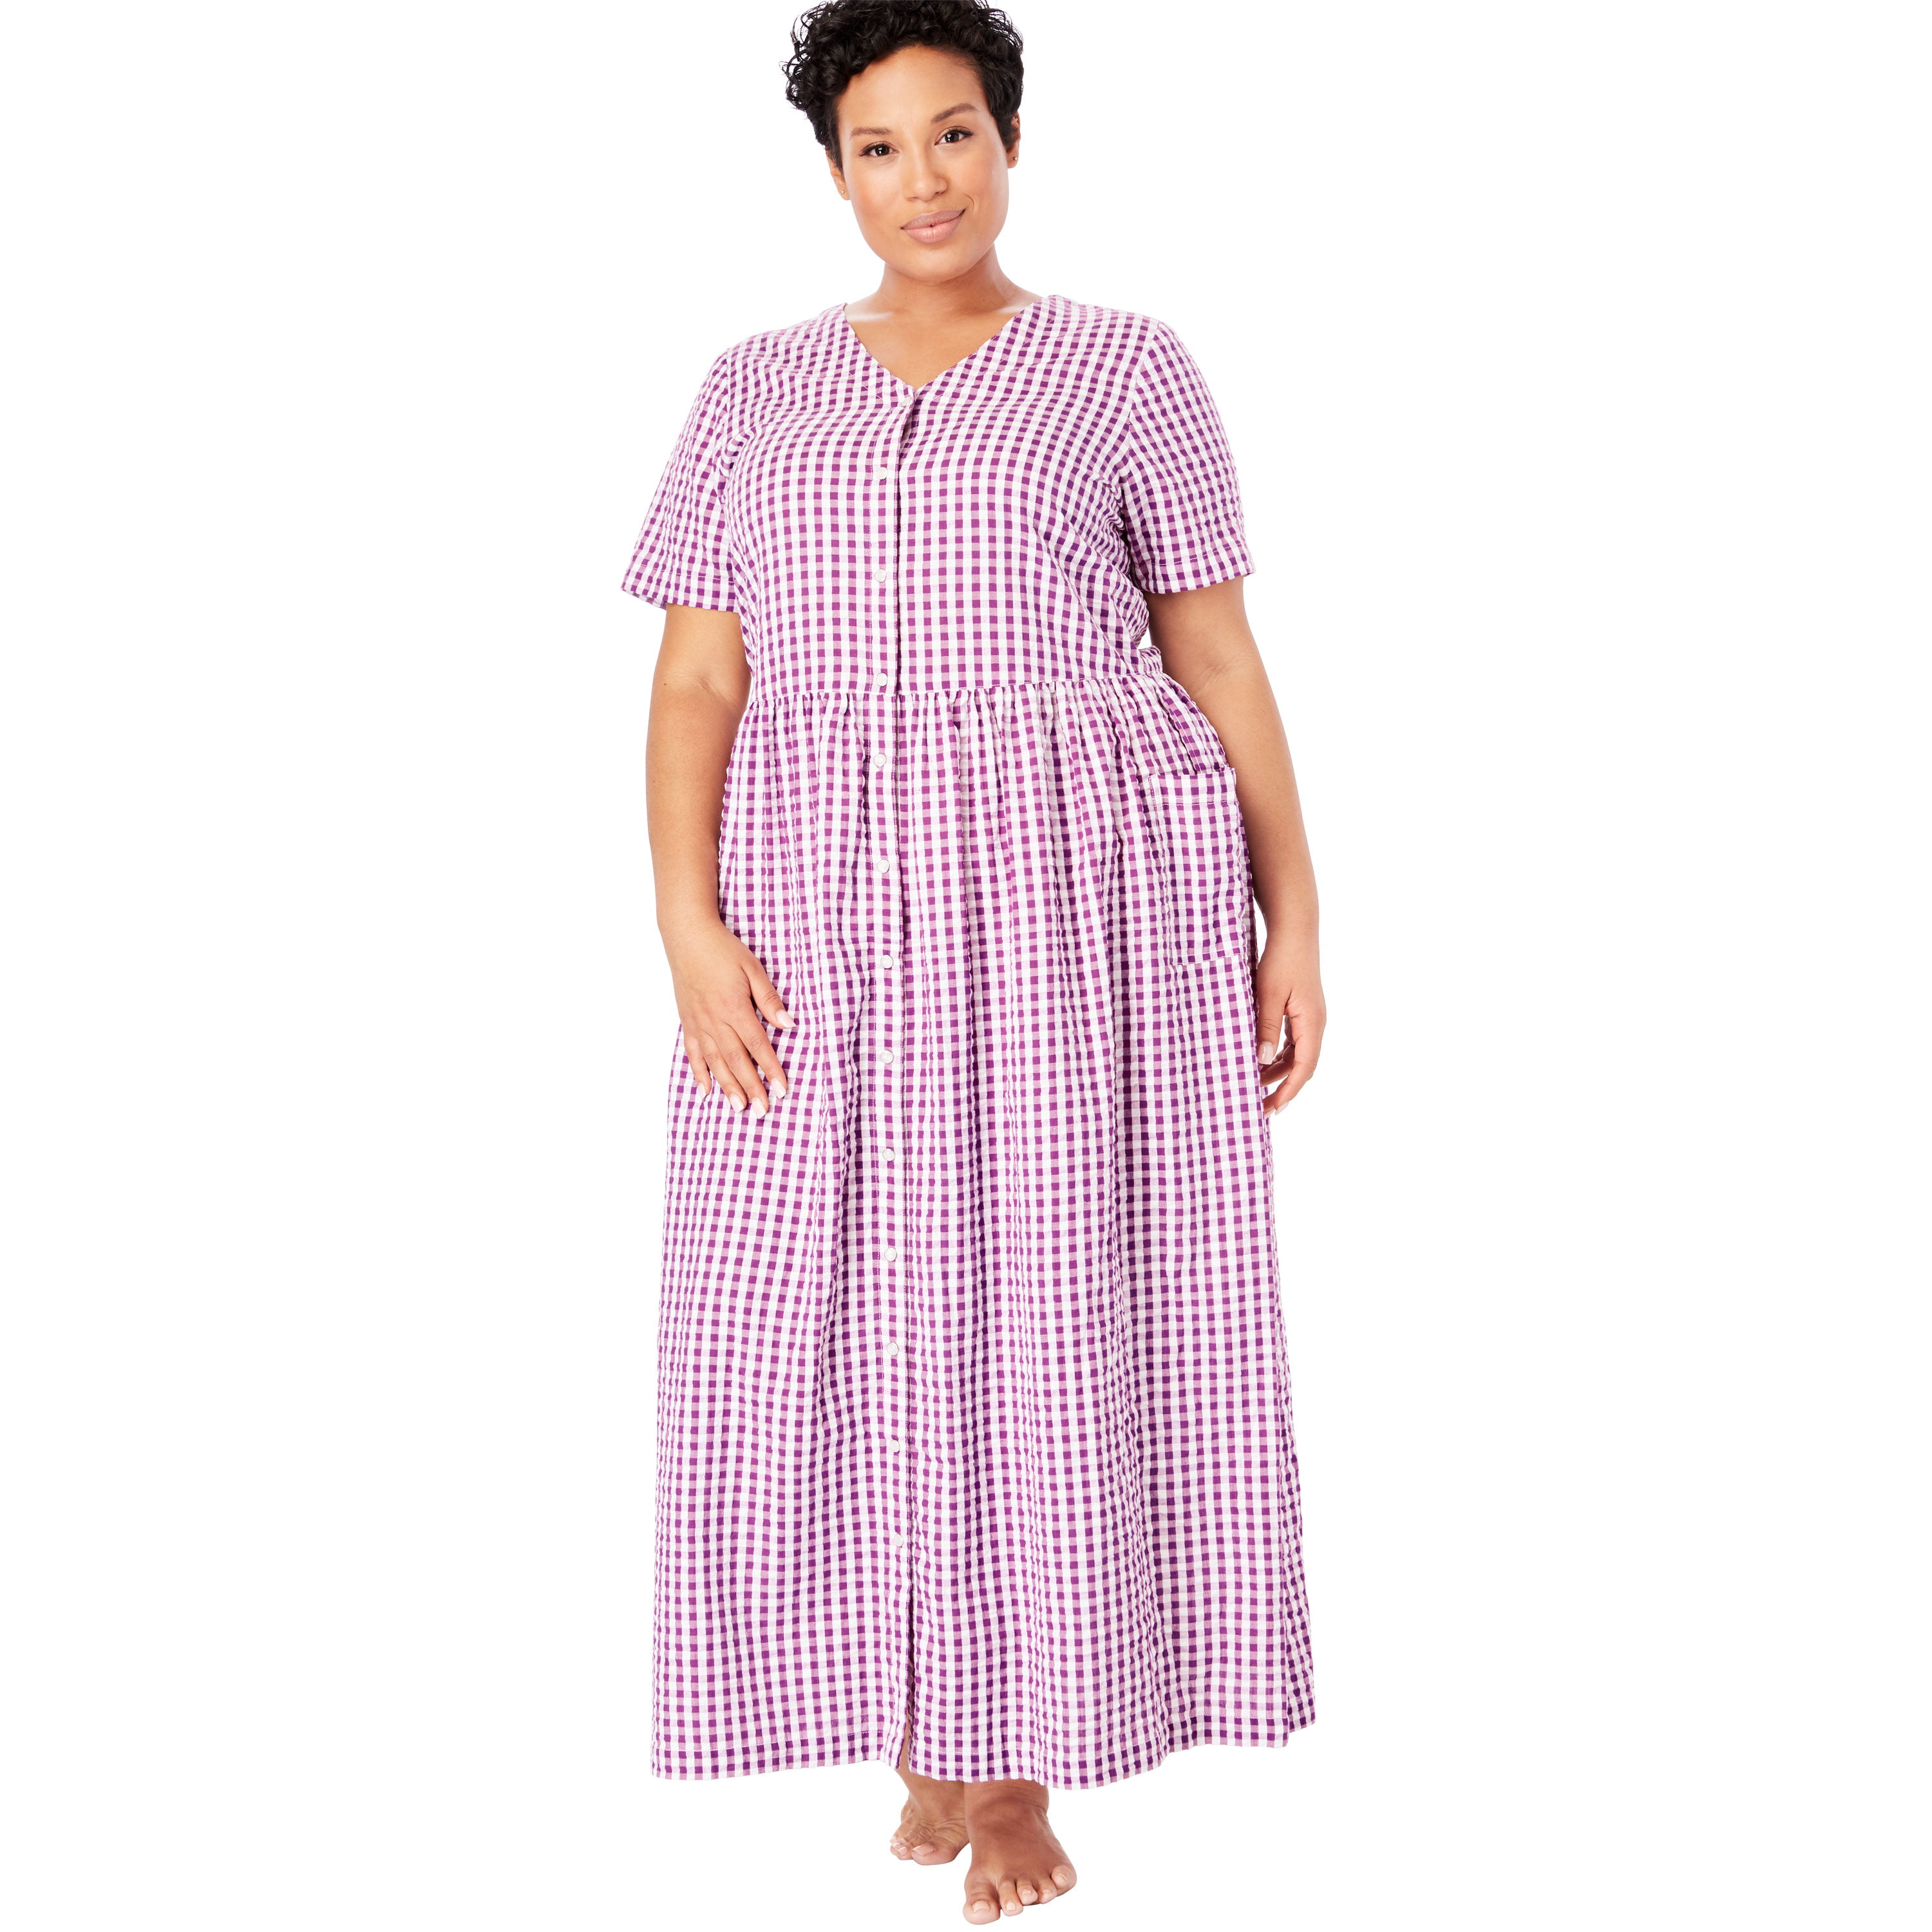 Only Necessities Womens Nightgown Robe Duster M 14/16 Gingham Snap Cotton Blend